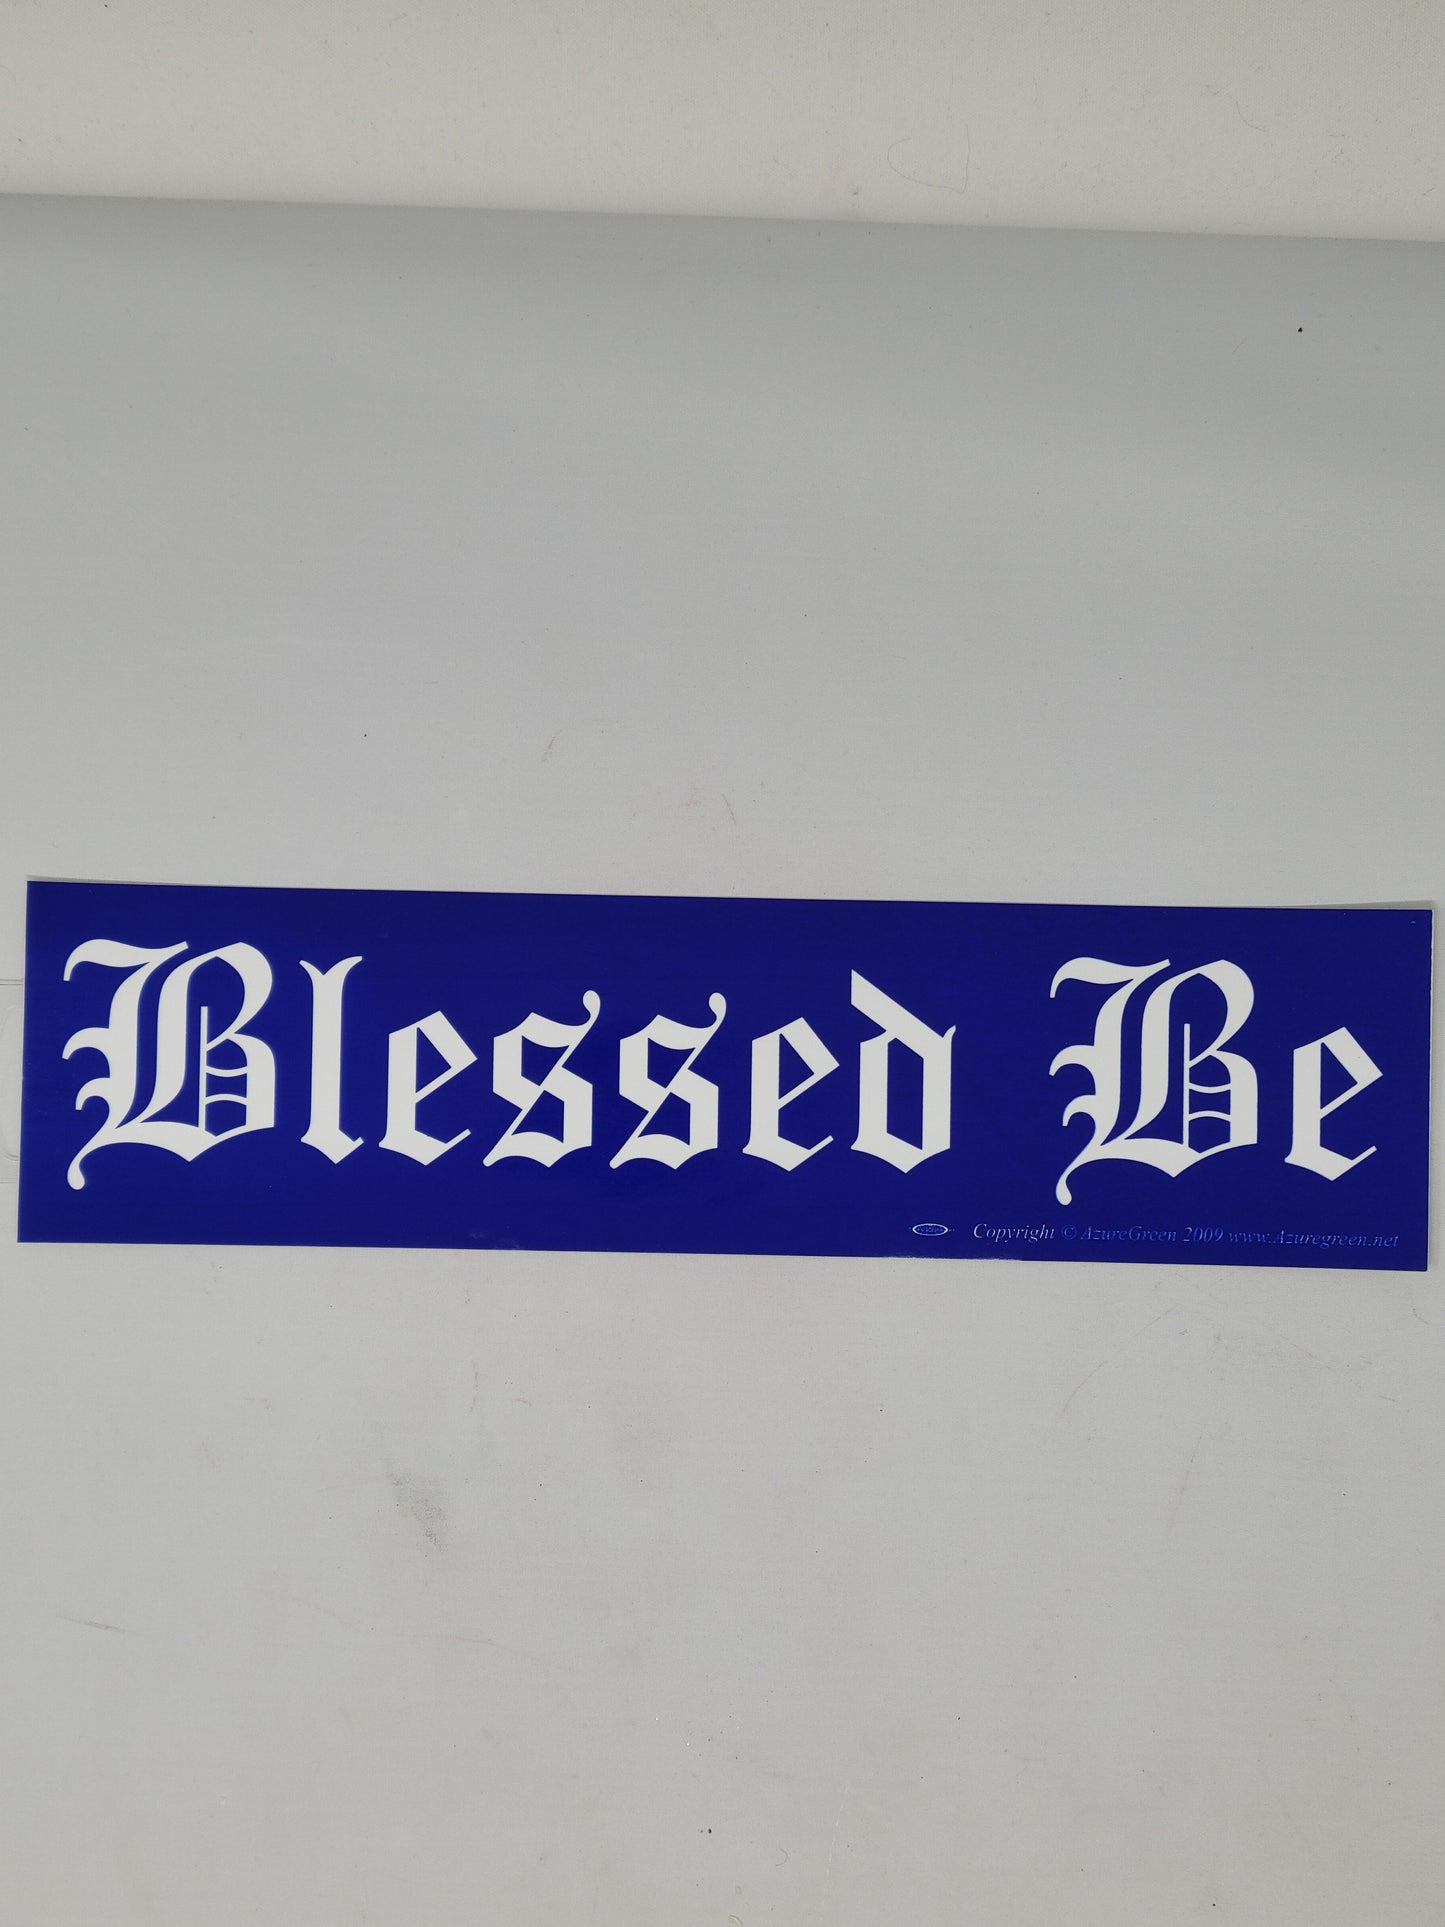 Bumper Stickers: Blessed Be